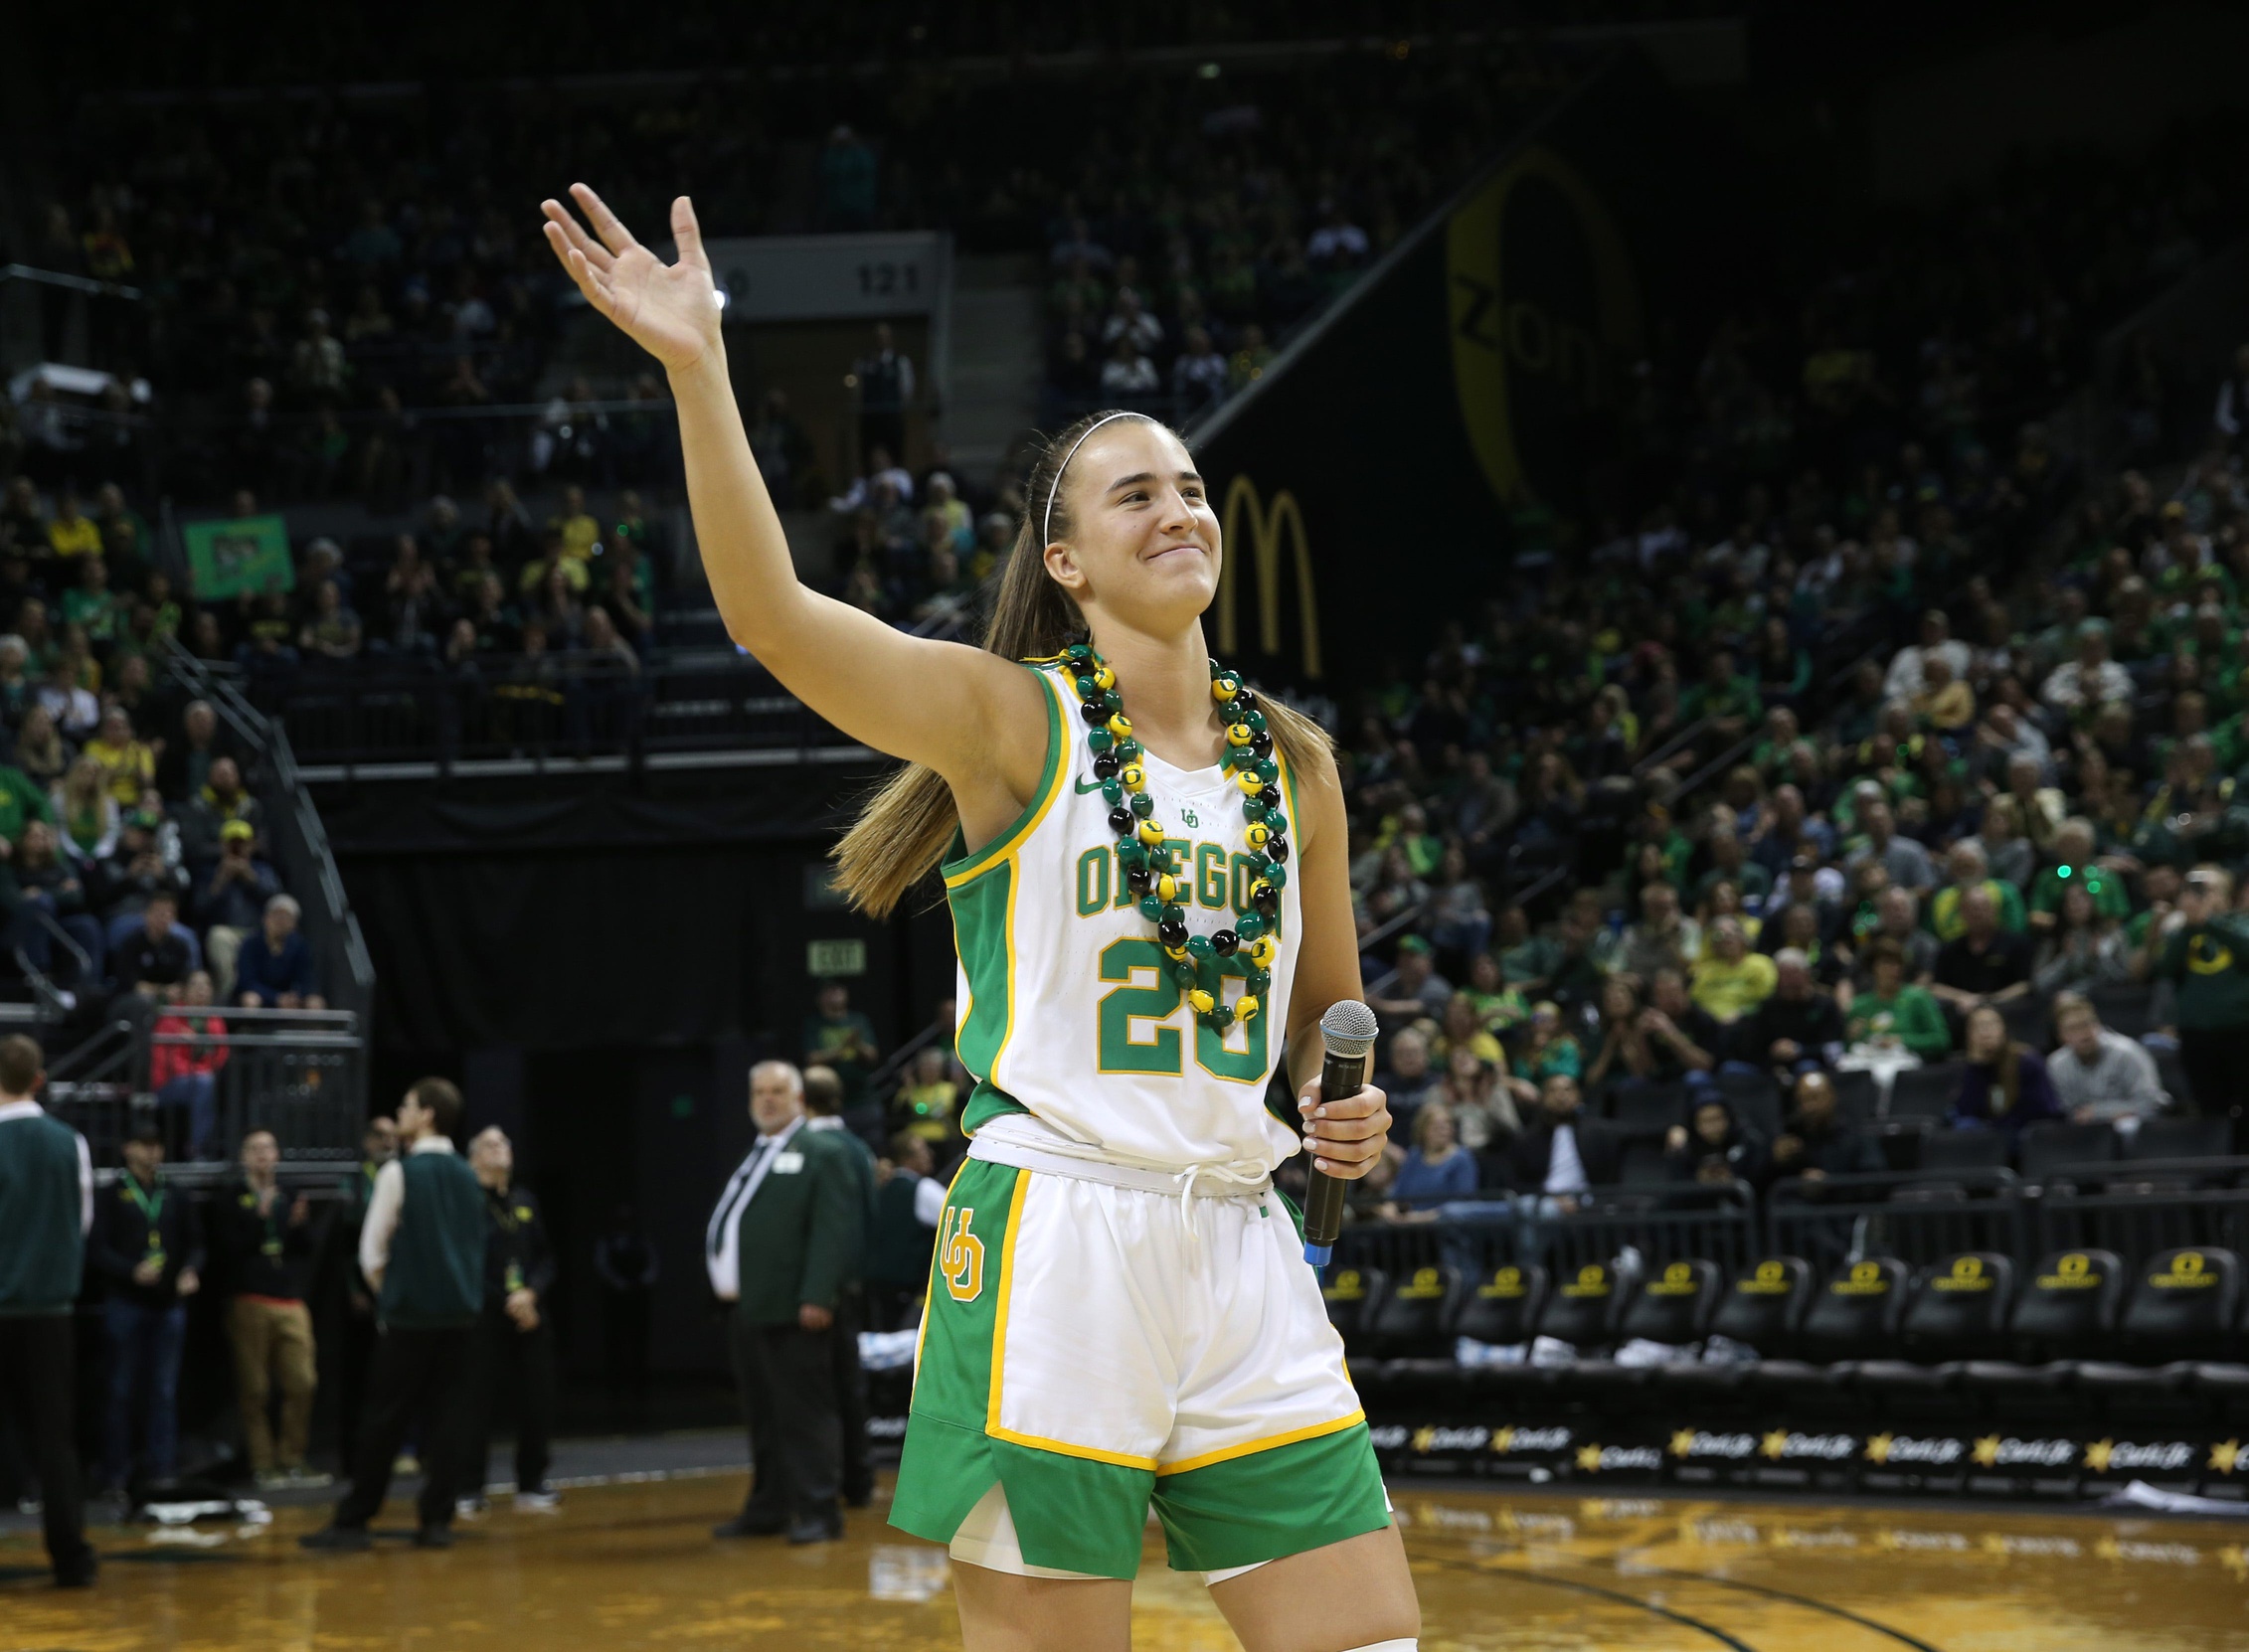 WNBA: Liberty's Ionescu records first career triple-double to down Lynx